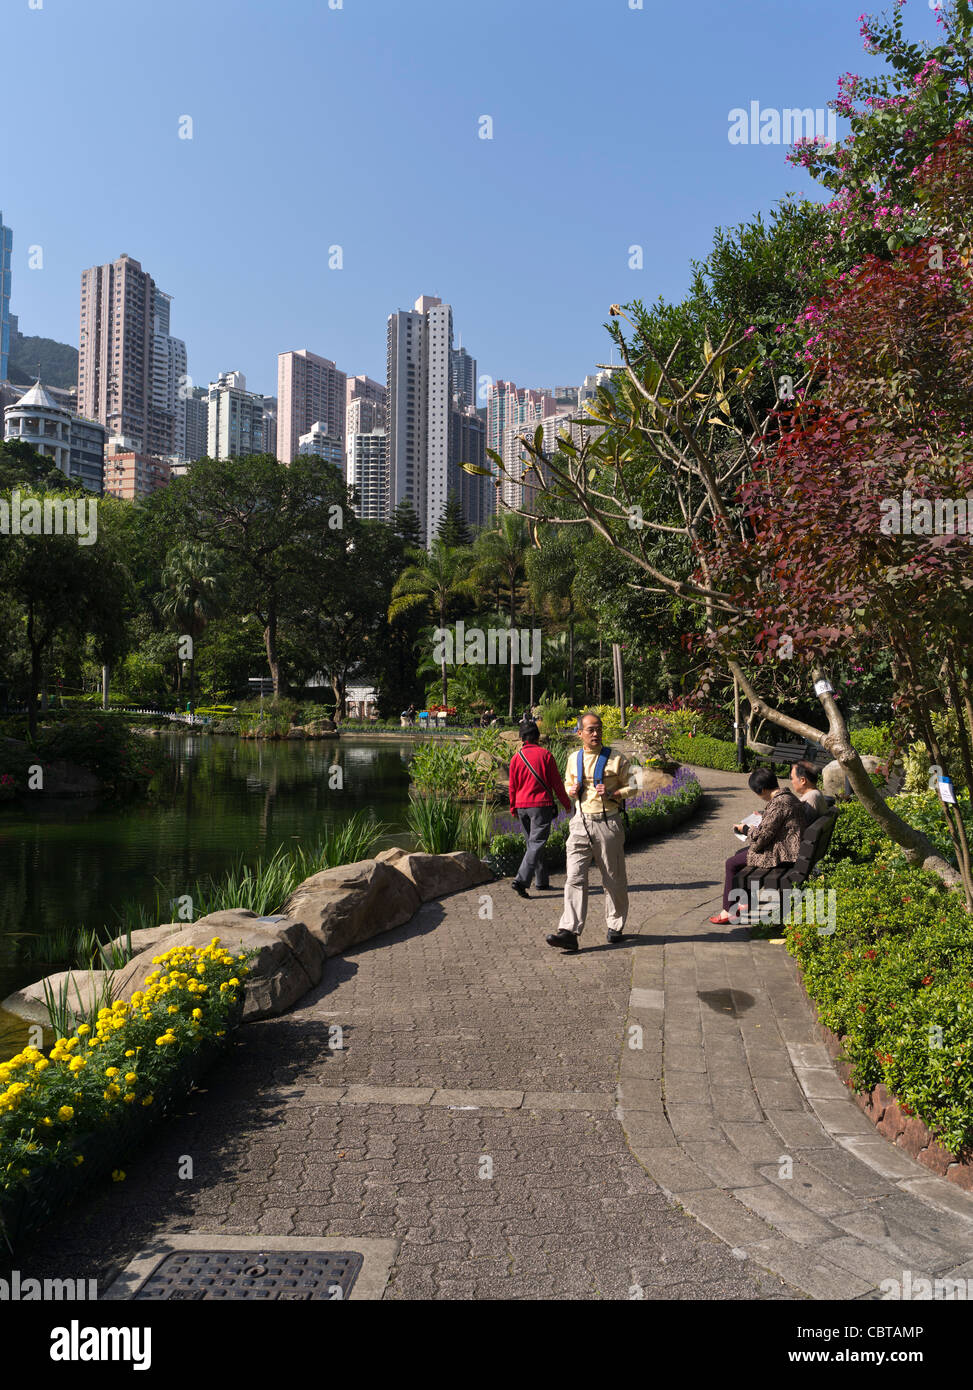 dh Hong Kong Park CENTRAL HONG KONG People in park lake and Mid levels skyscrapers gardens tourist china garden Stock Photo